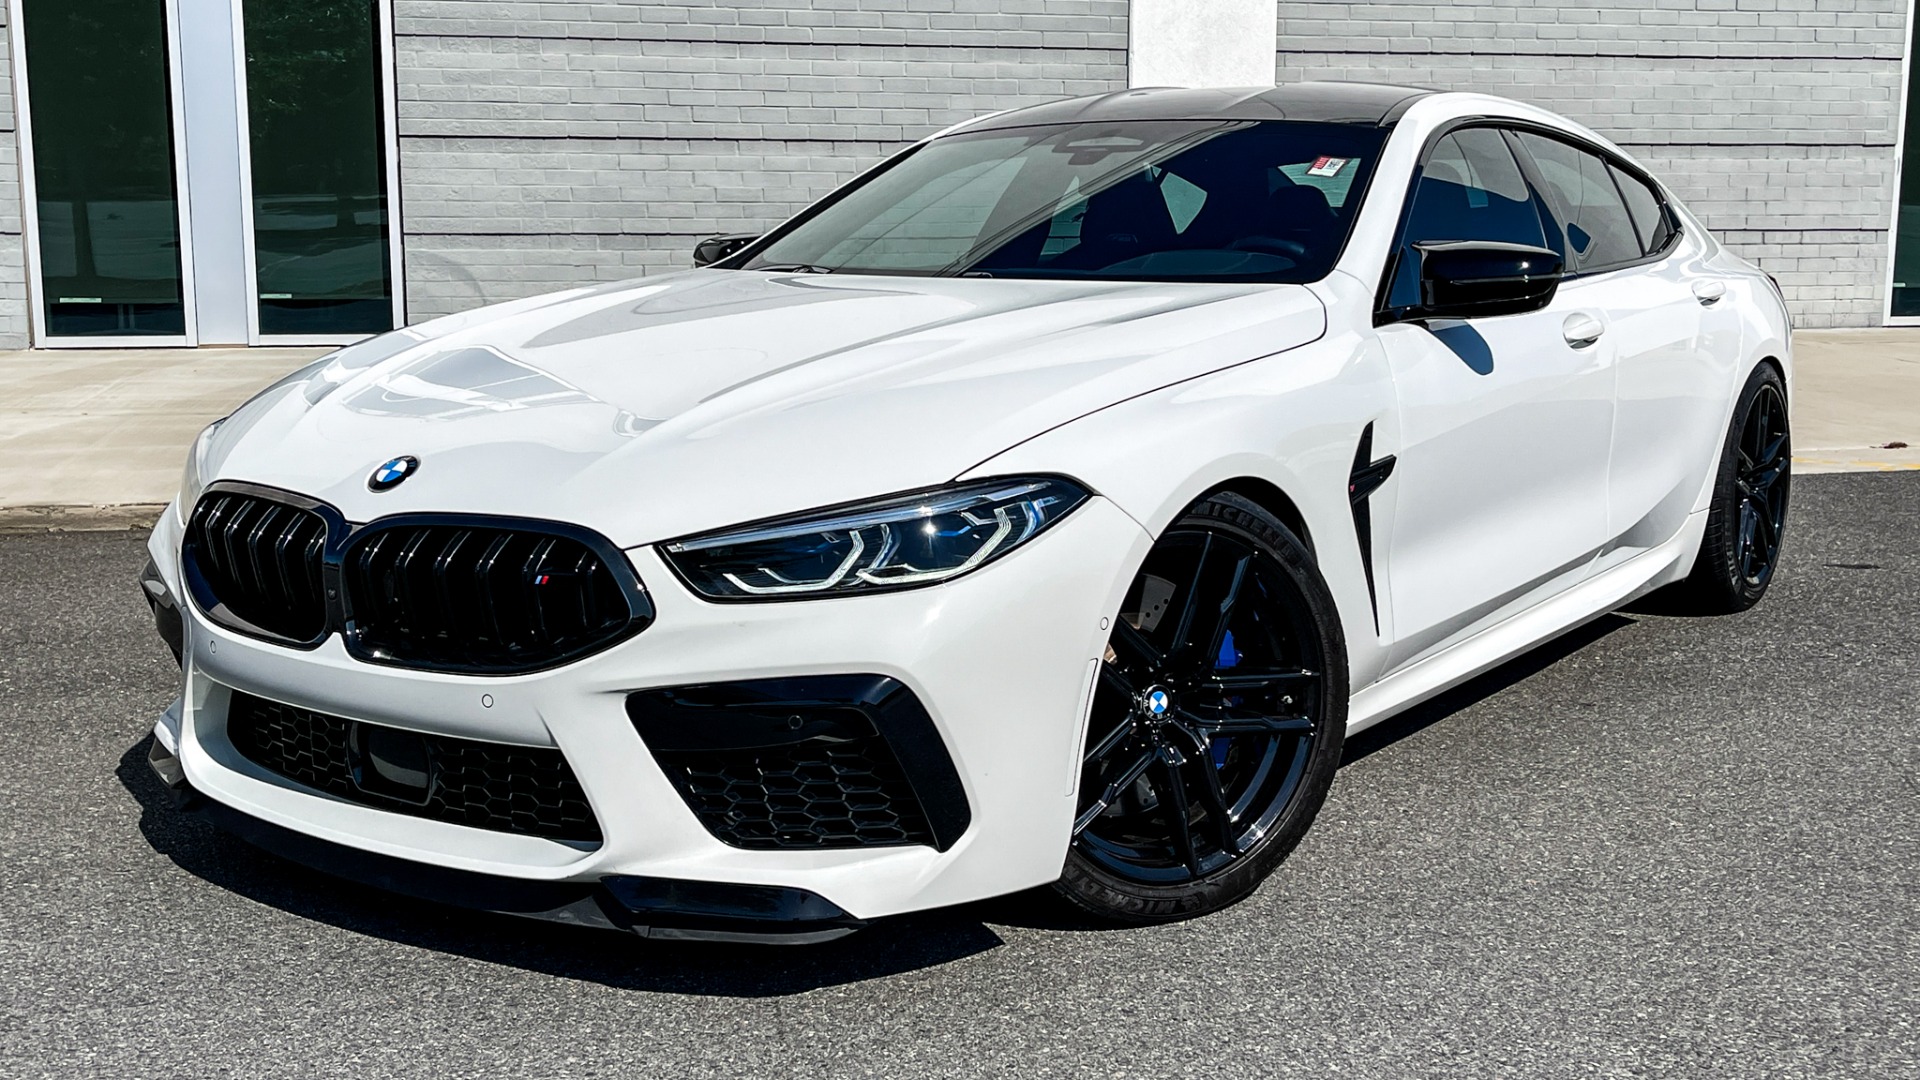 Used 2020 BMW M8 COMPETITON / TWIN TURBO / KW V3 SUSPENSION / FRONT LIFT / PPF / CERAMIC COA for sale Sold at Formula Imports in Charlotte NC 28227 1